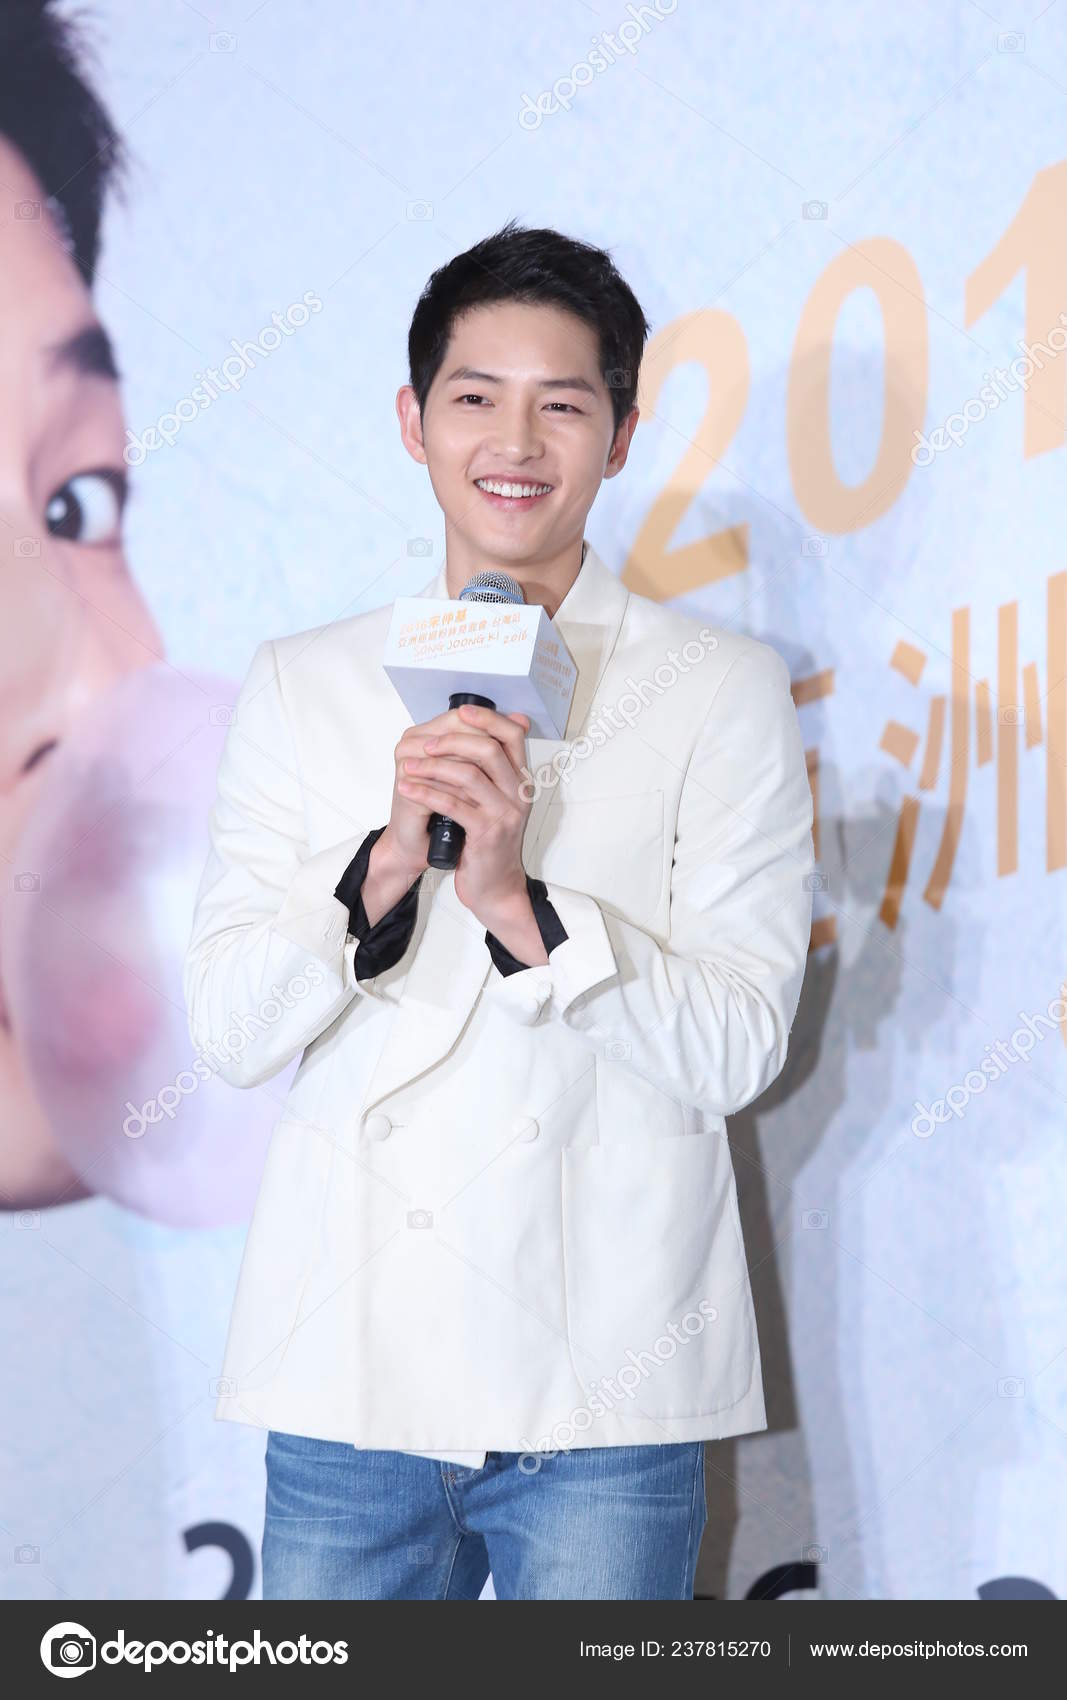 Song Joong Ki Meets His Character From “Descendants Of The Sun”